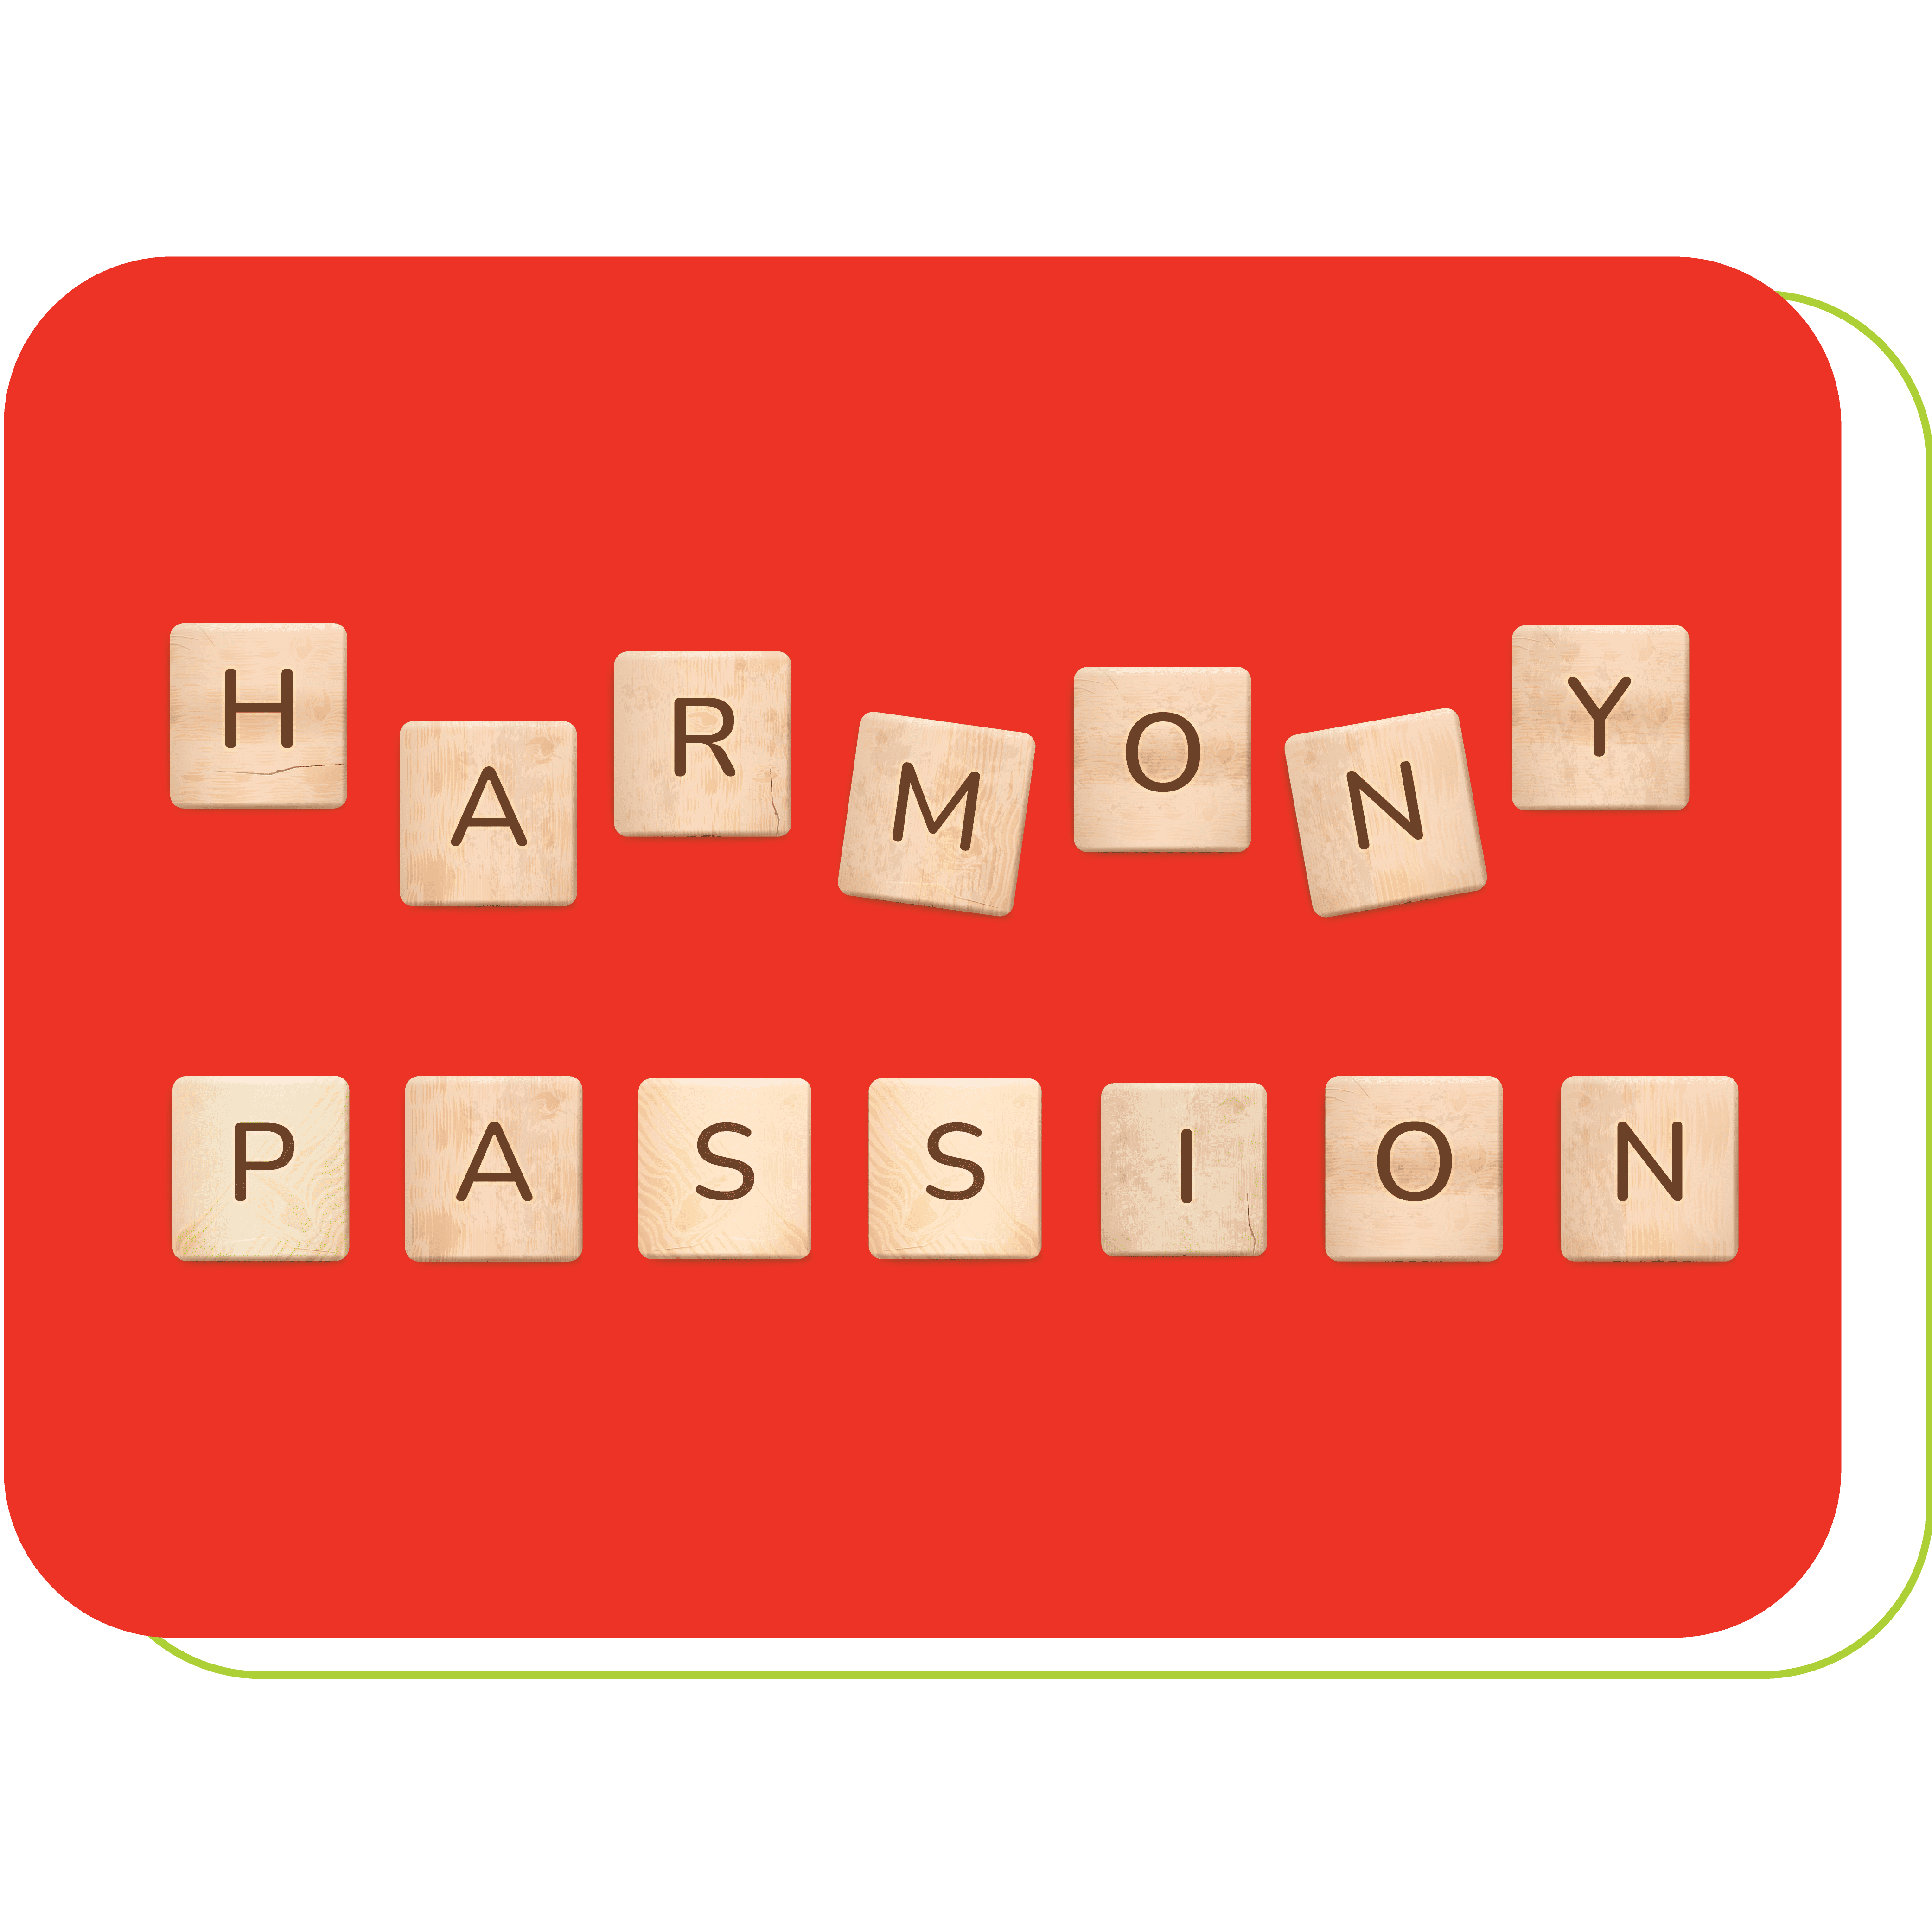 Lead with Passion, Harmonious Passion